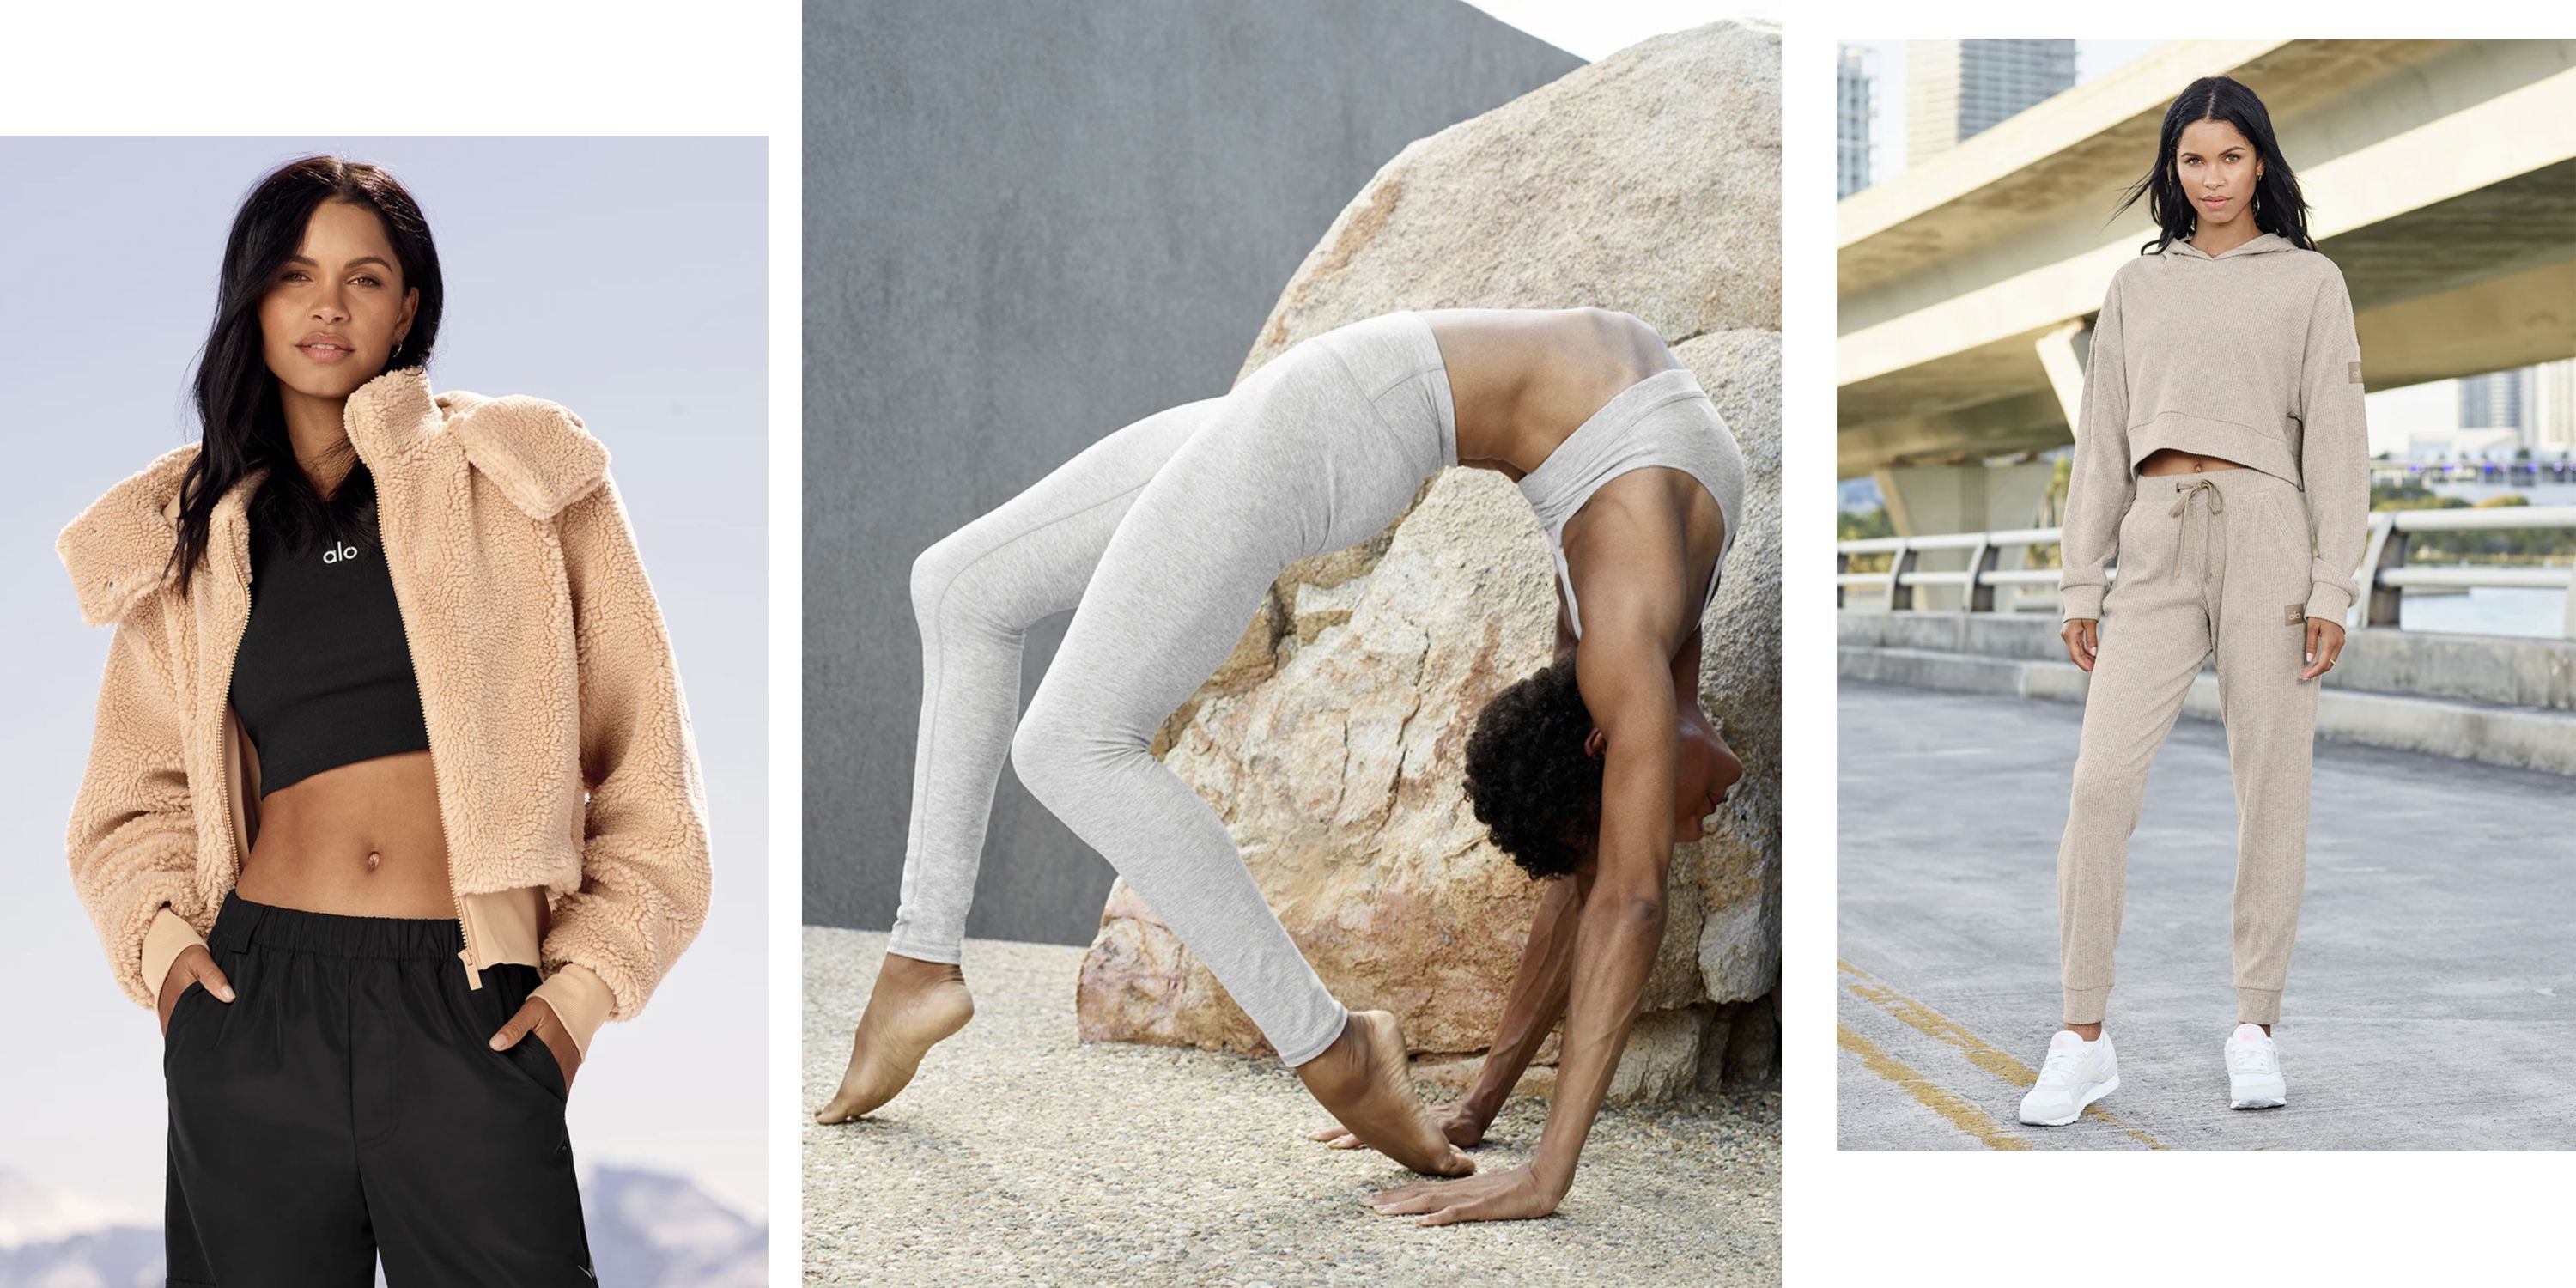 Alo Yoga's Coolest Activewear Is Marked Down for Black Friday